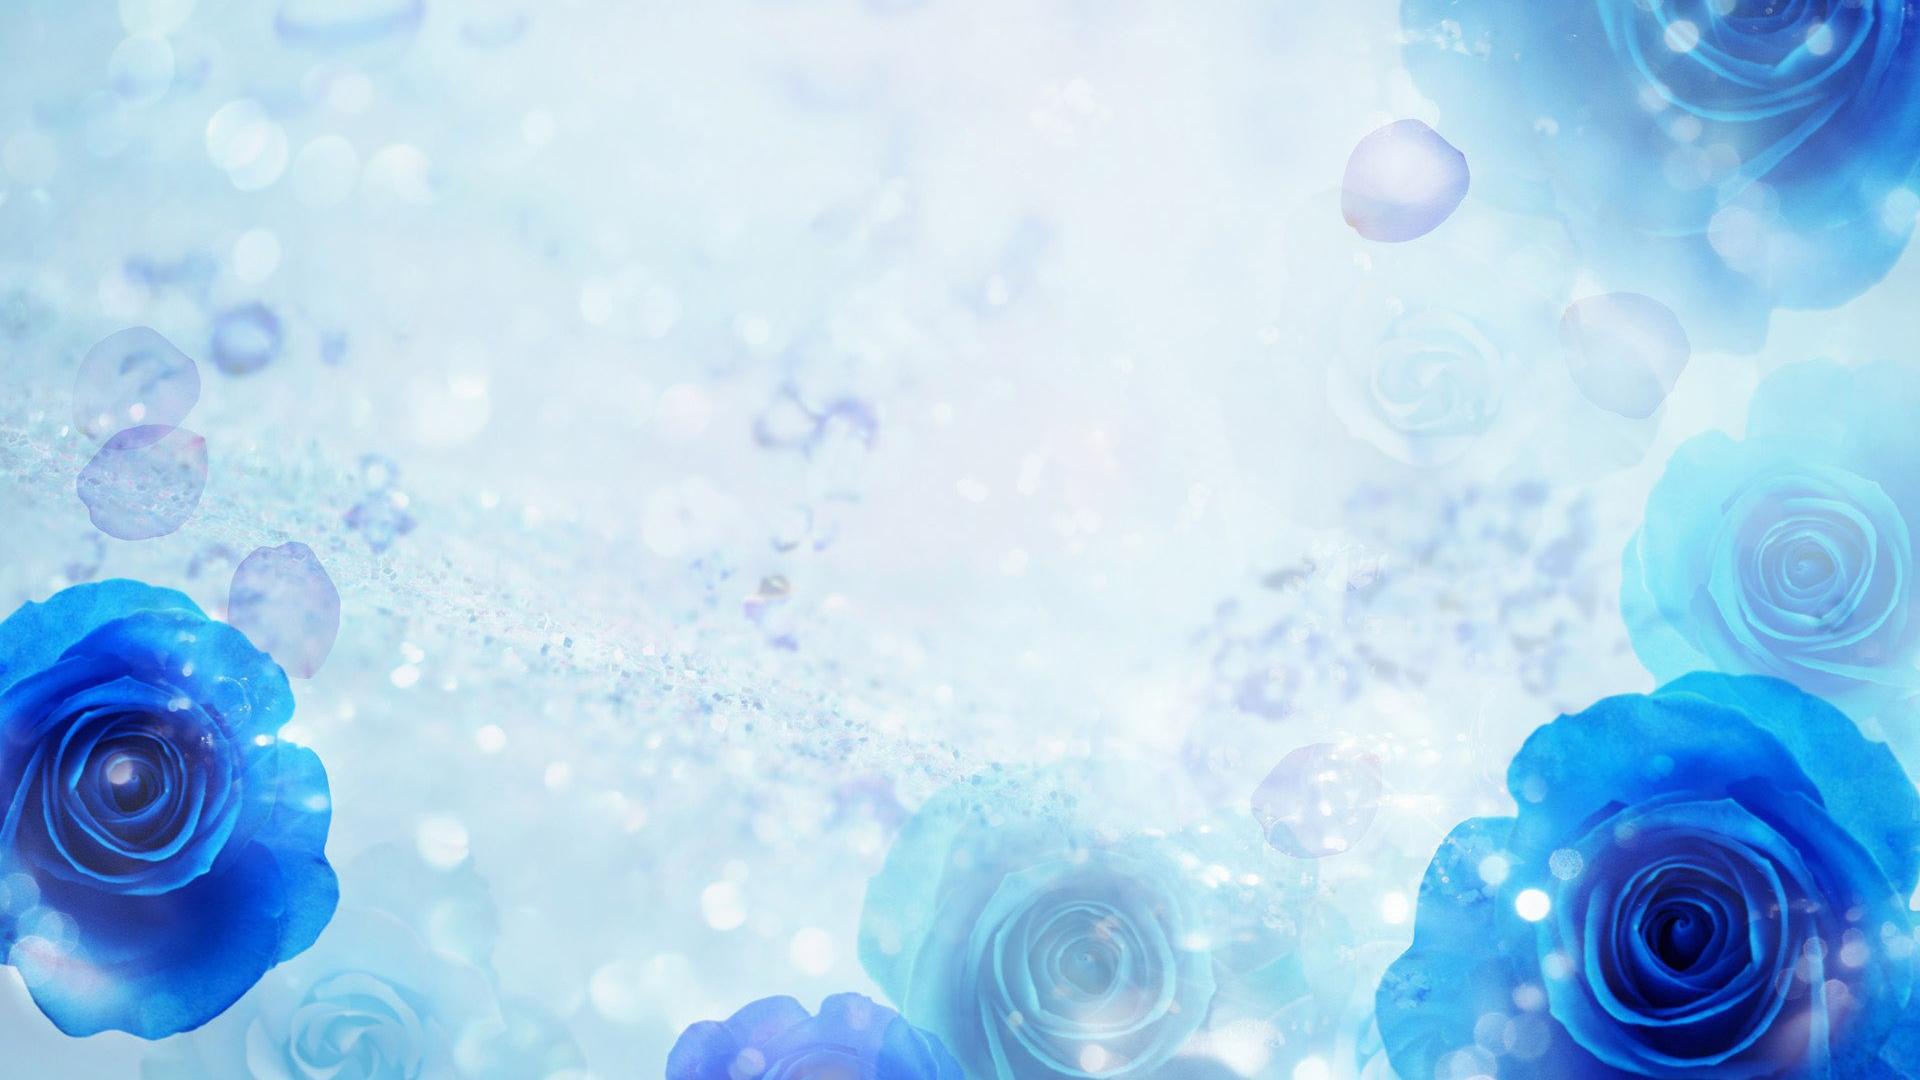 Blue roses on a blue background wallpapers and images - wallpapers ...